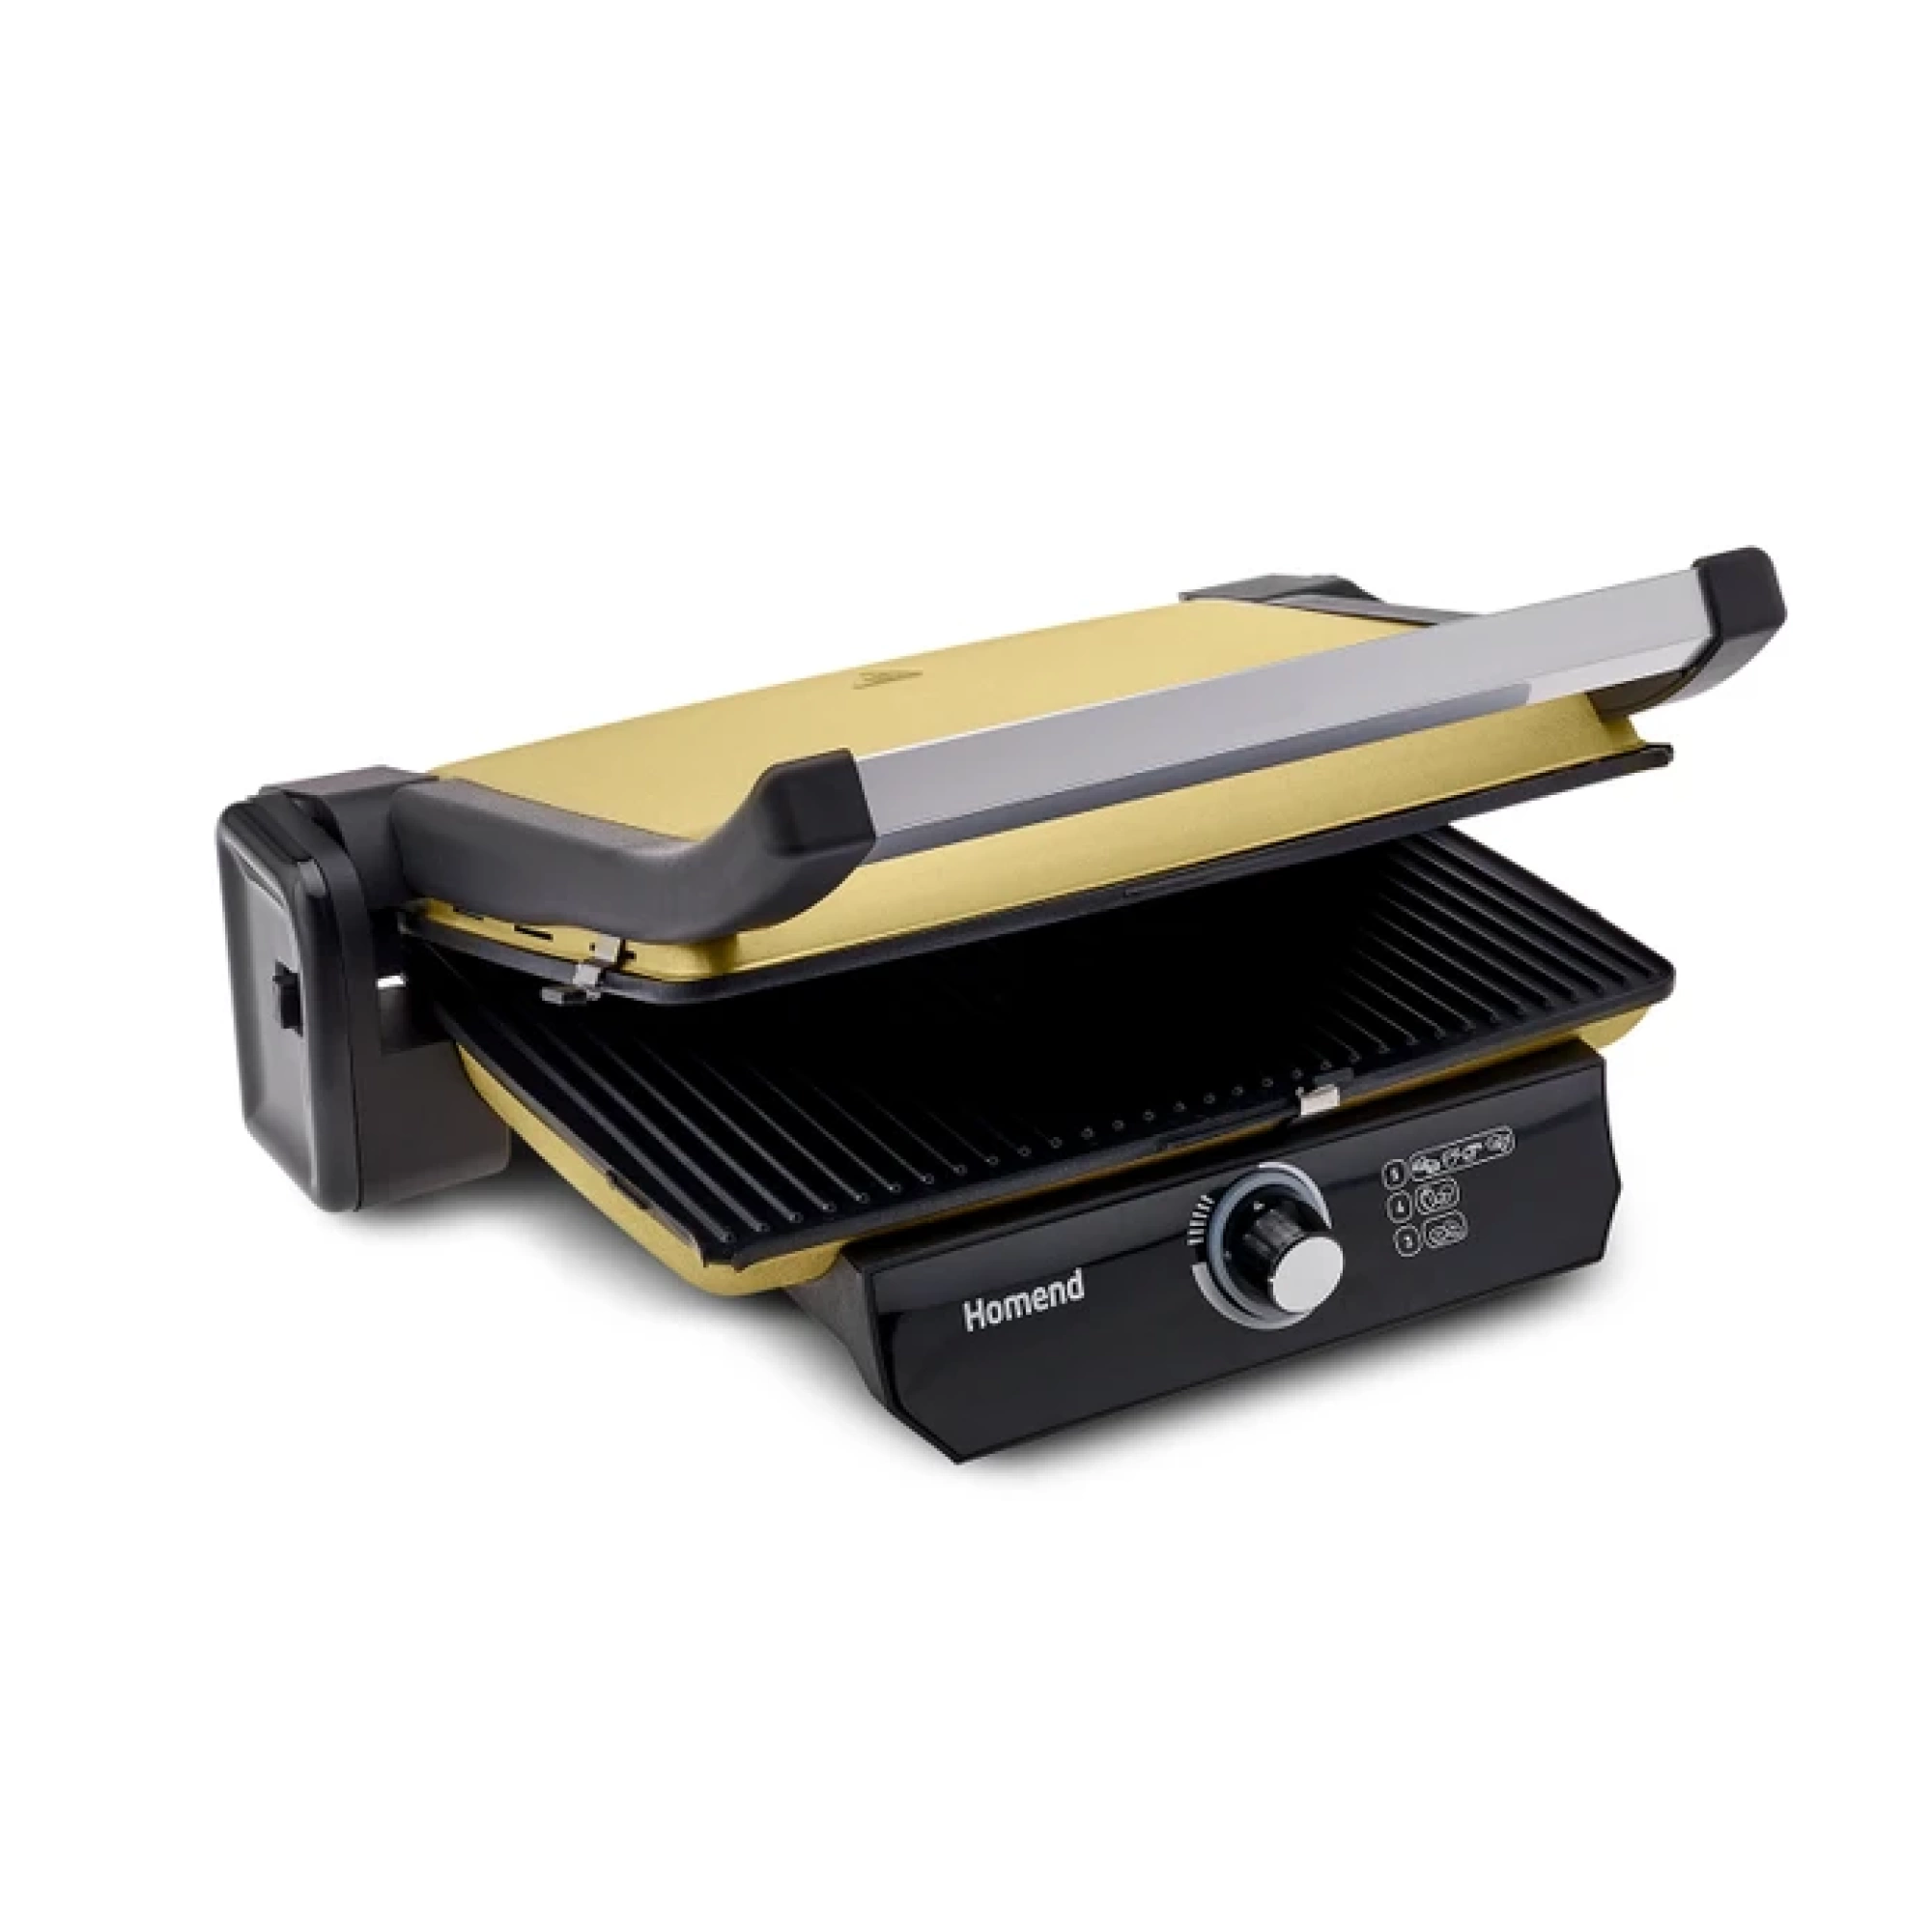 TOST MAKİNESİ HOMEND TOASTBUSTER 1378H GOLD